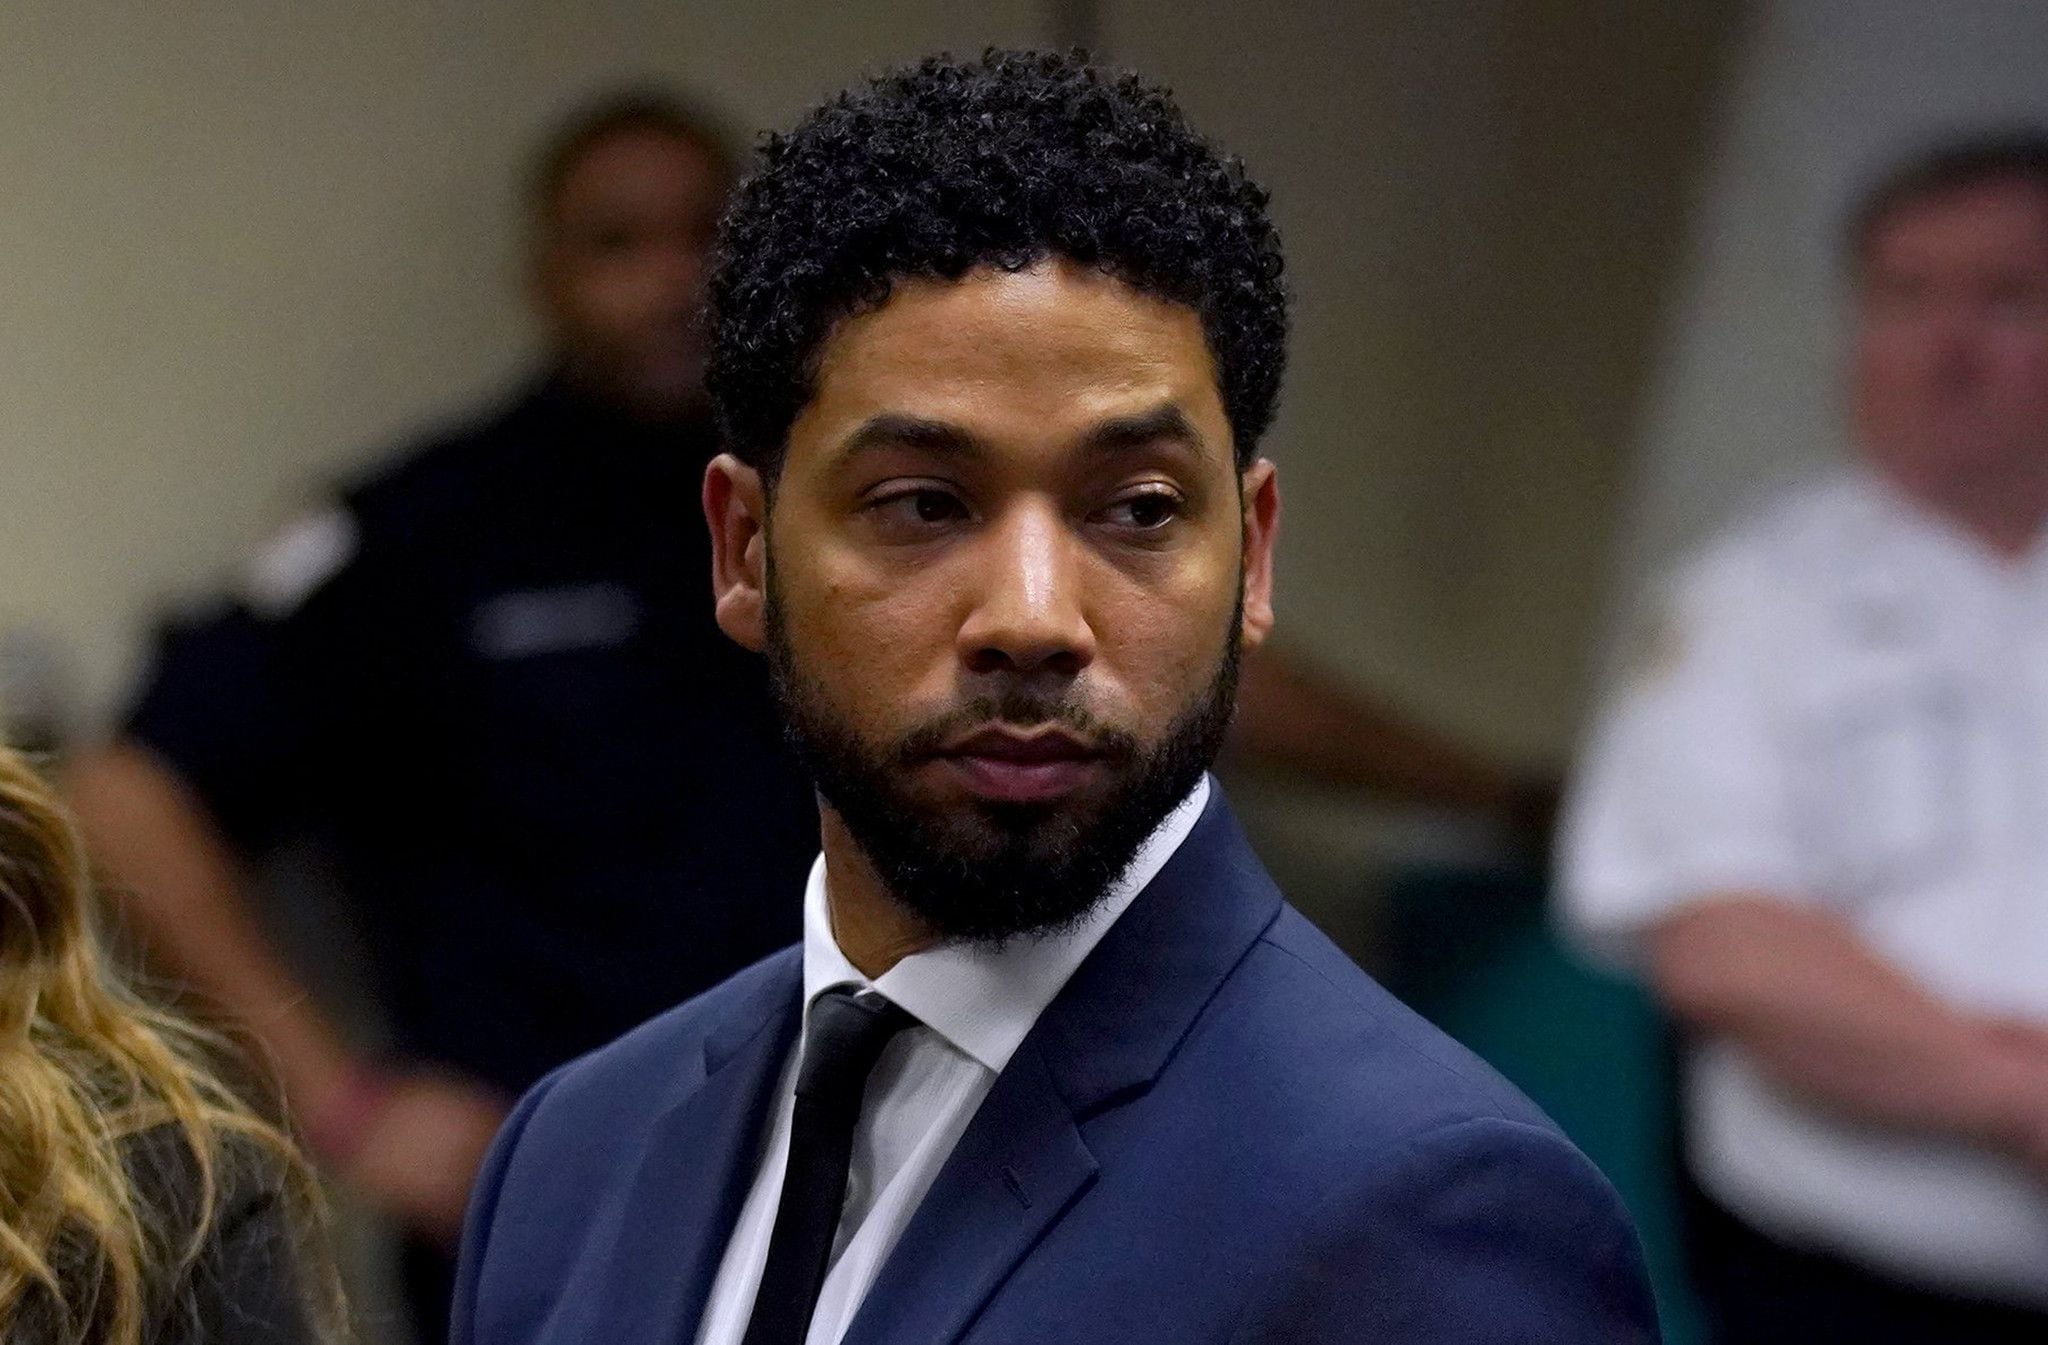 Jussie Smollett given opportunity to appeal conviction to Illinois Supreme Court